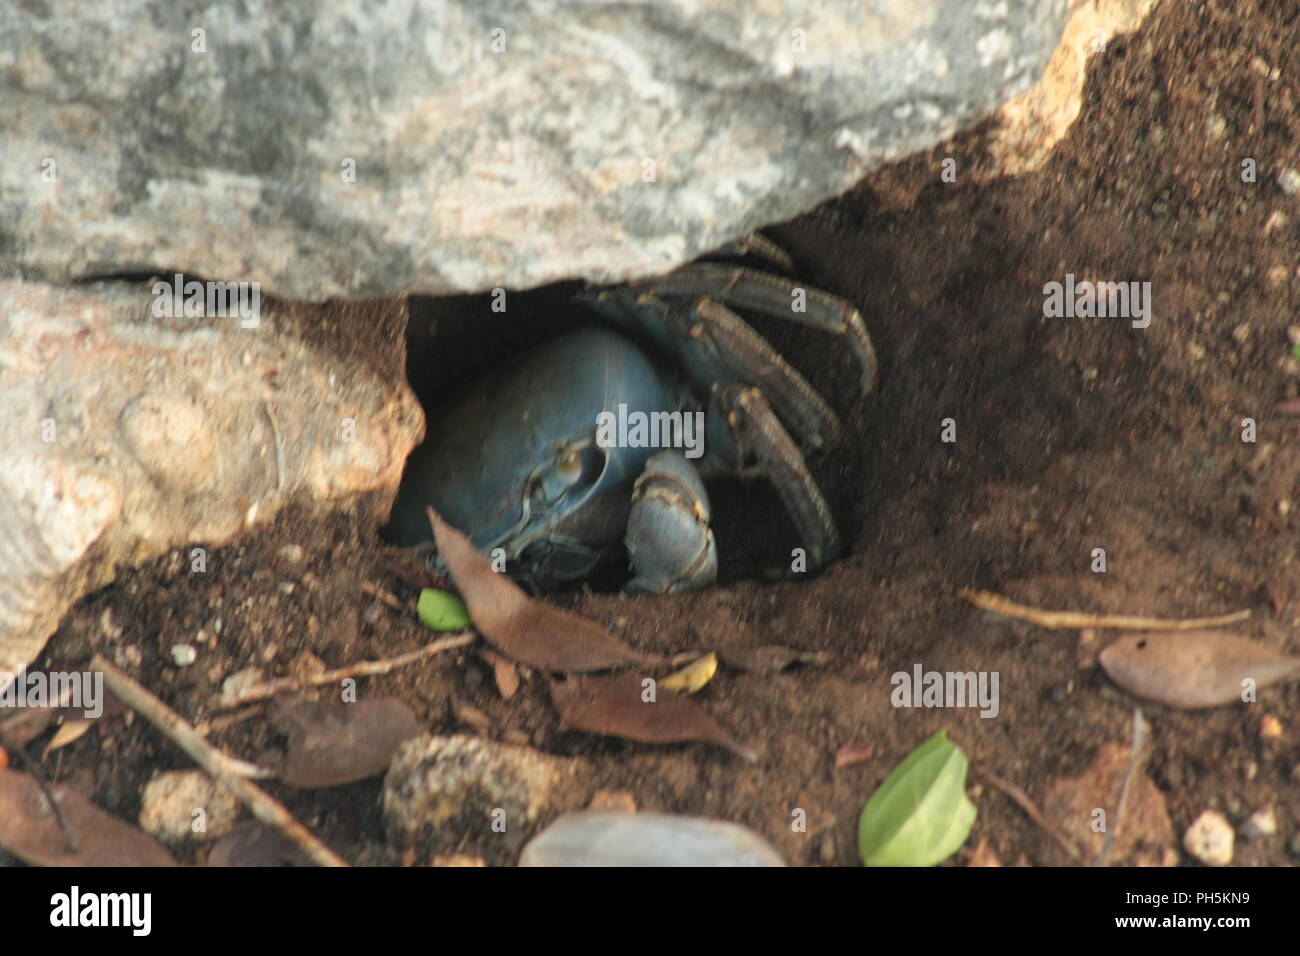 Crab in a burrow Stock Photo